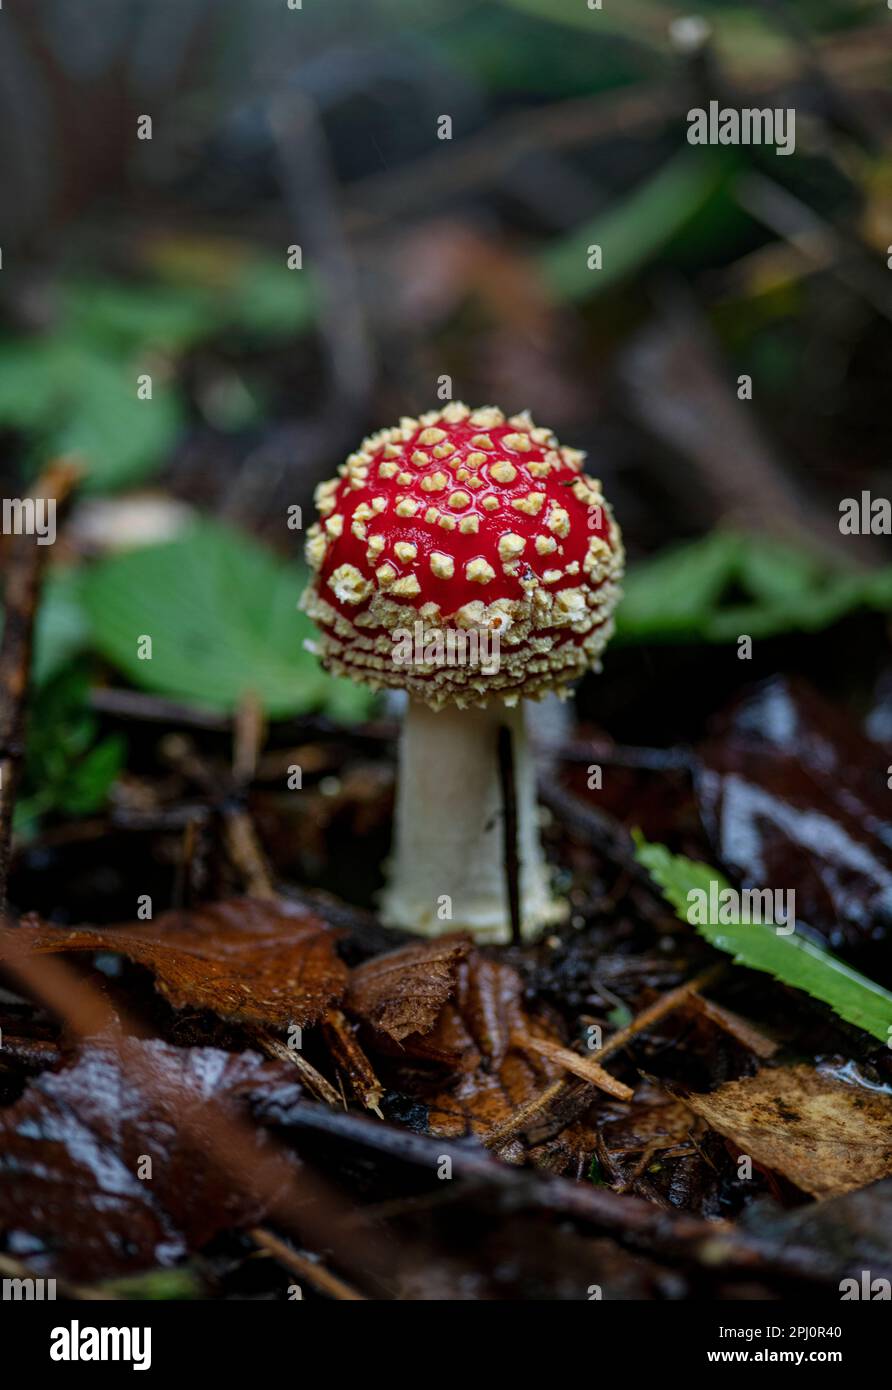 Fly agaric mushroom growing on the forest floor in Gloucestershire in autumn. Fungus growing in the decomposing material on the woodland ground Stock Photo